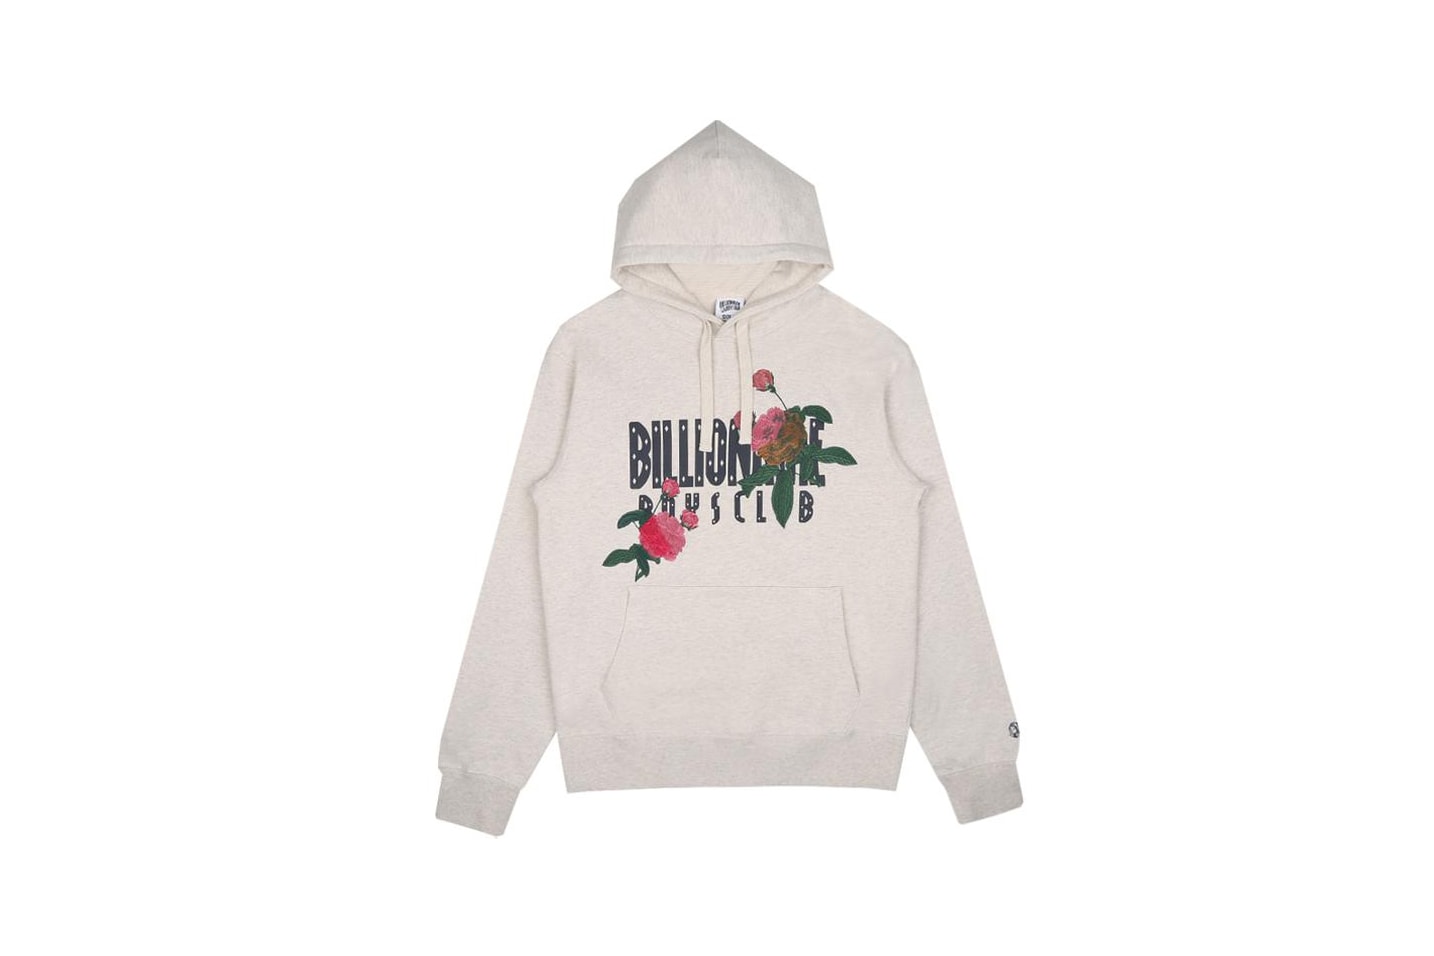 Billionaire Boys Club Spring 2018 Embroidered Floral Hoodie Oat Marl